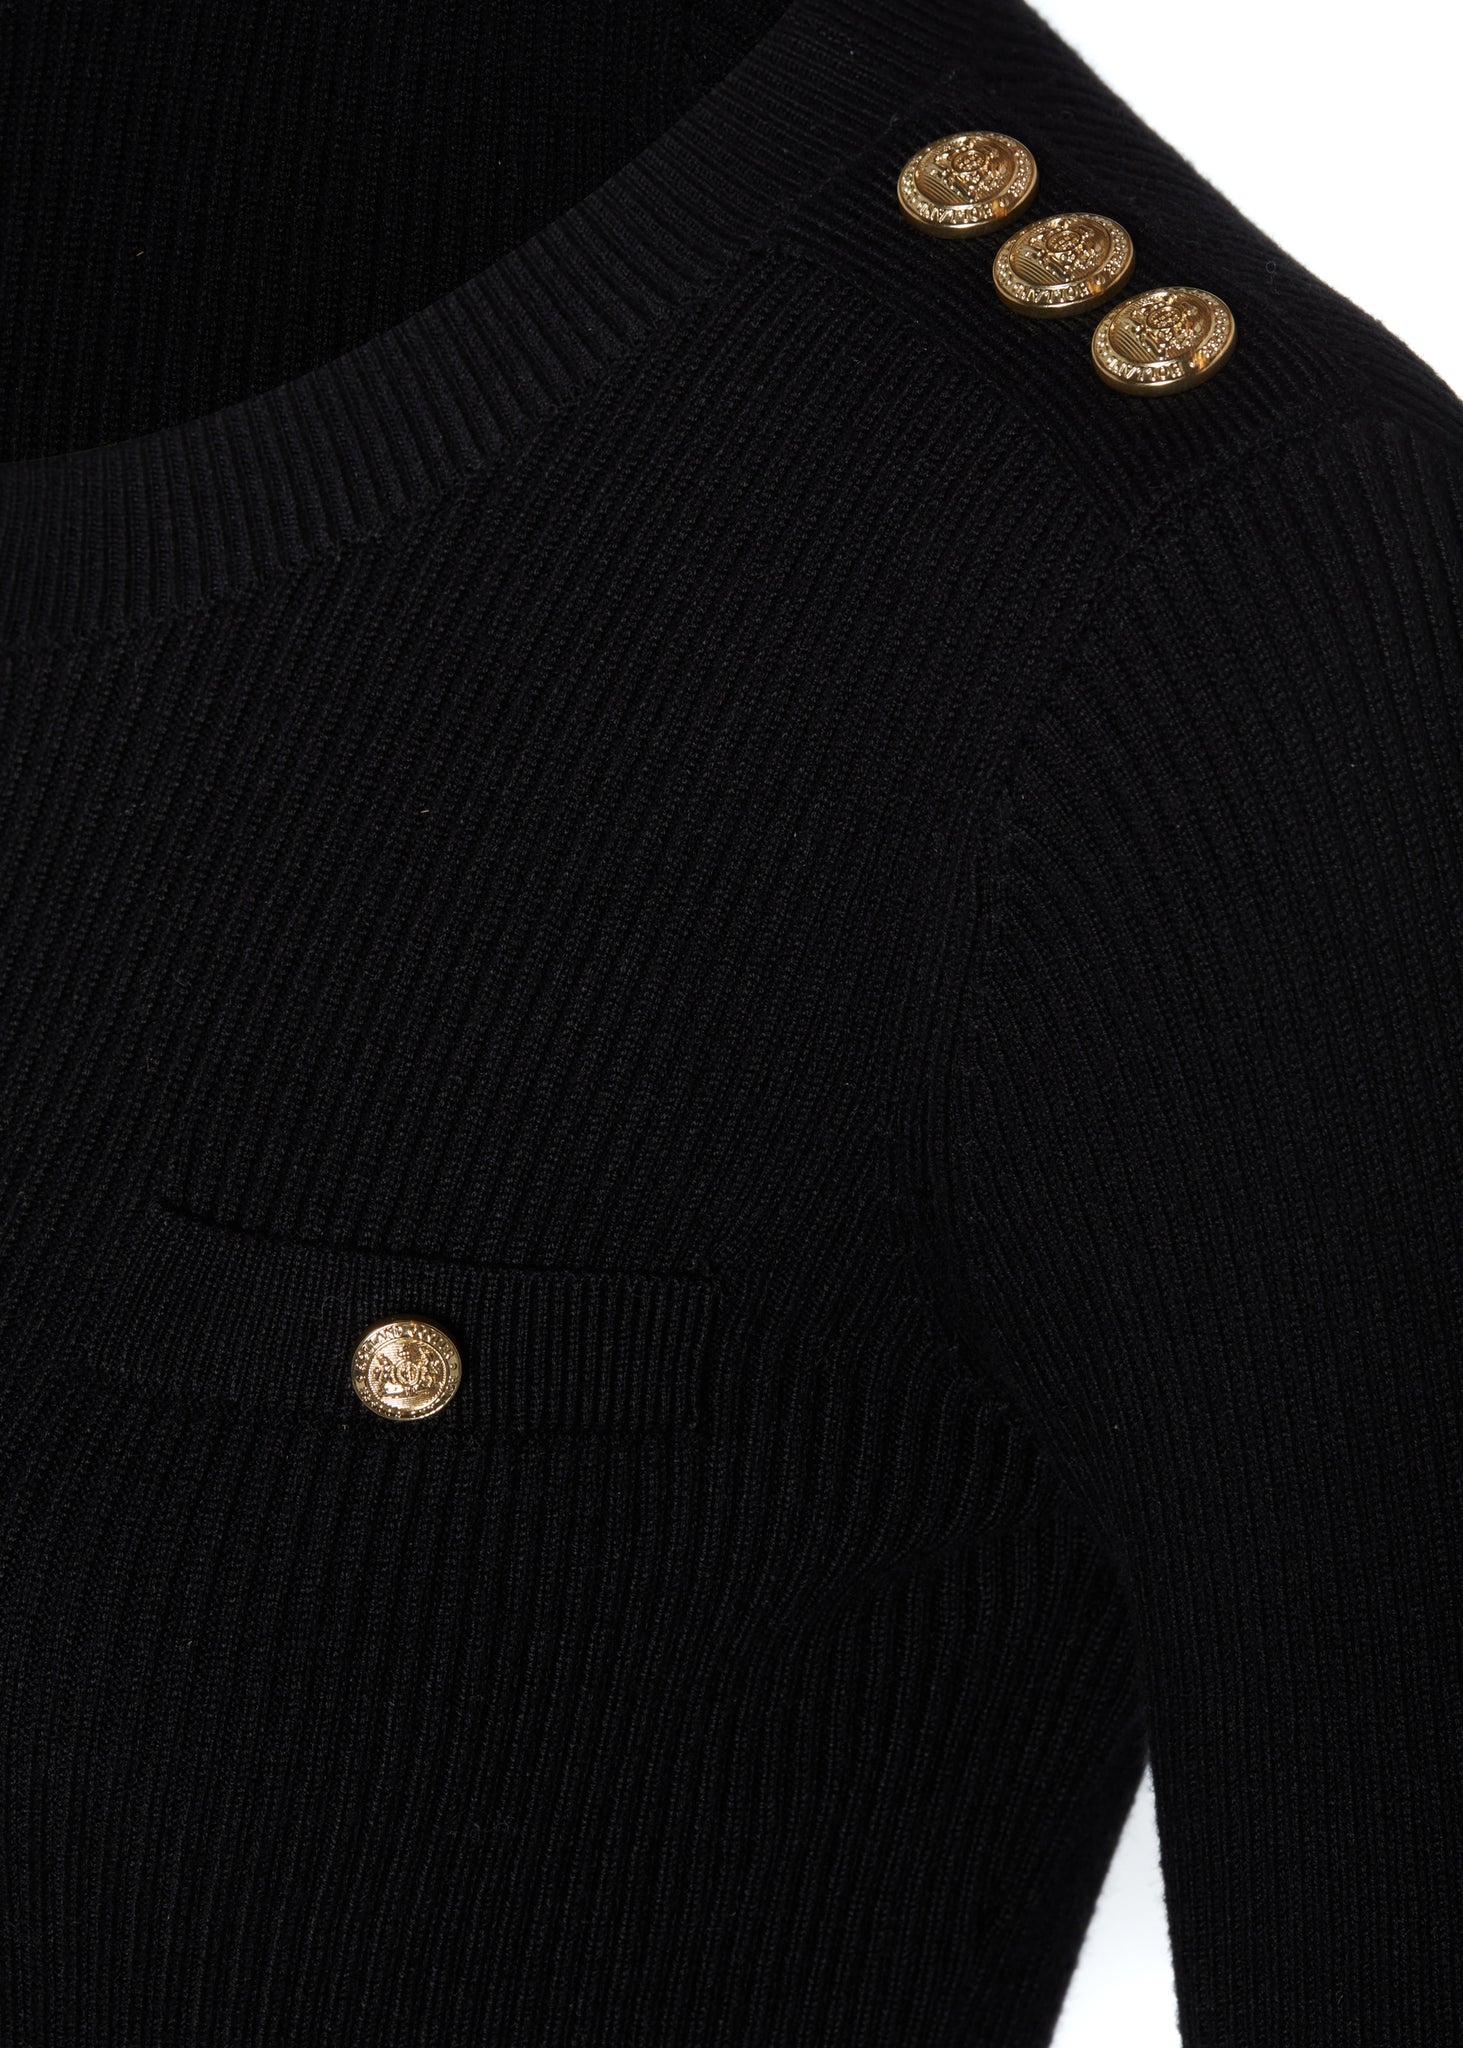 gold button detail across shoulders of womens slim fit crew neck long sleeve knitted midi dress in black with gold button detail down the centre front and two welt pockets on chest and two on the hips with gold buttons on the centre of each pocket